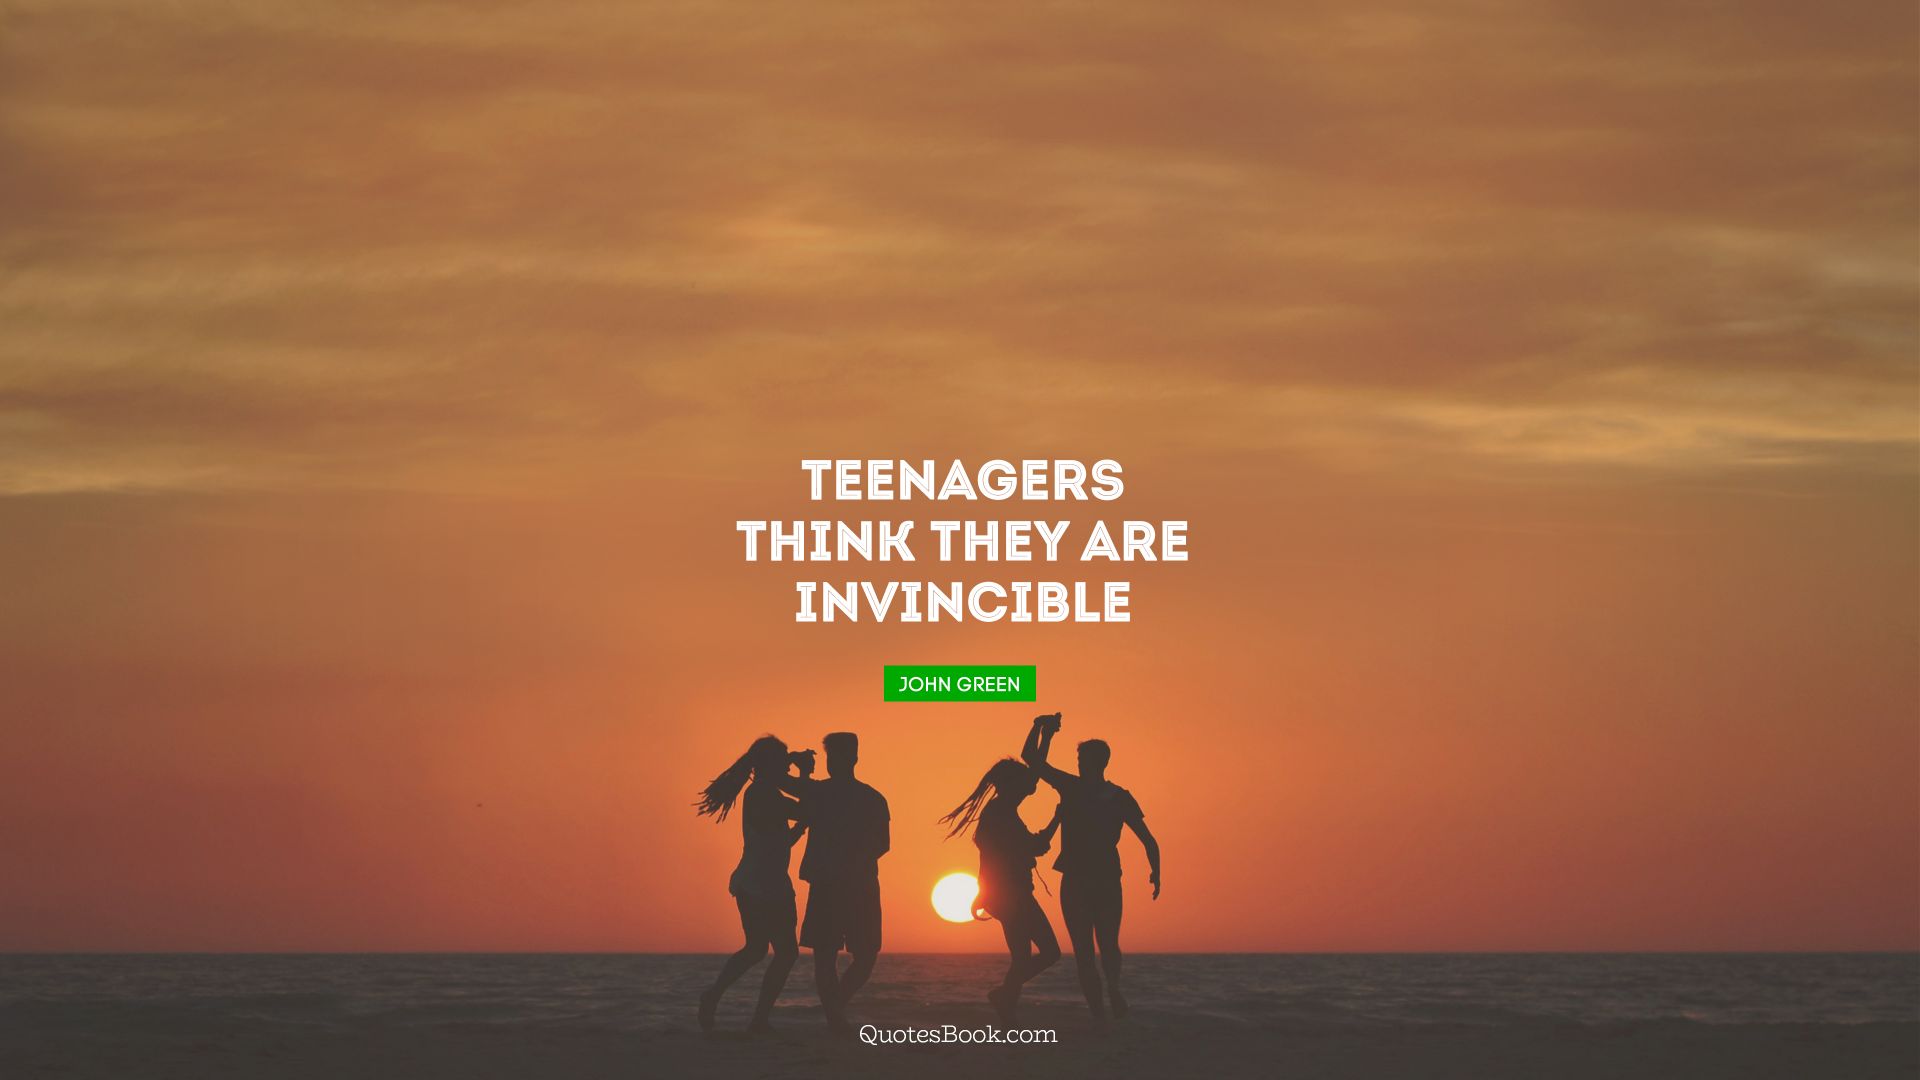 Teenagers think they are invincible. - Quote by John Green